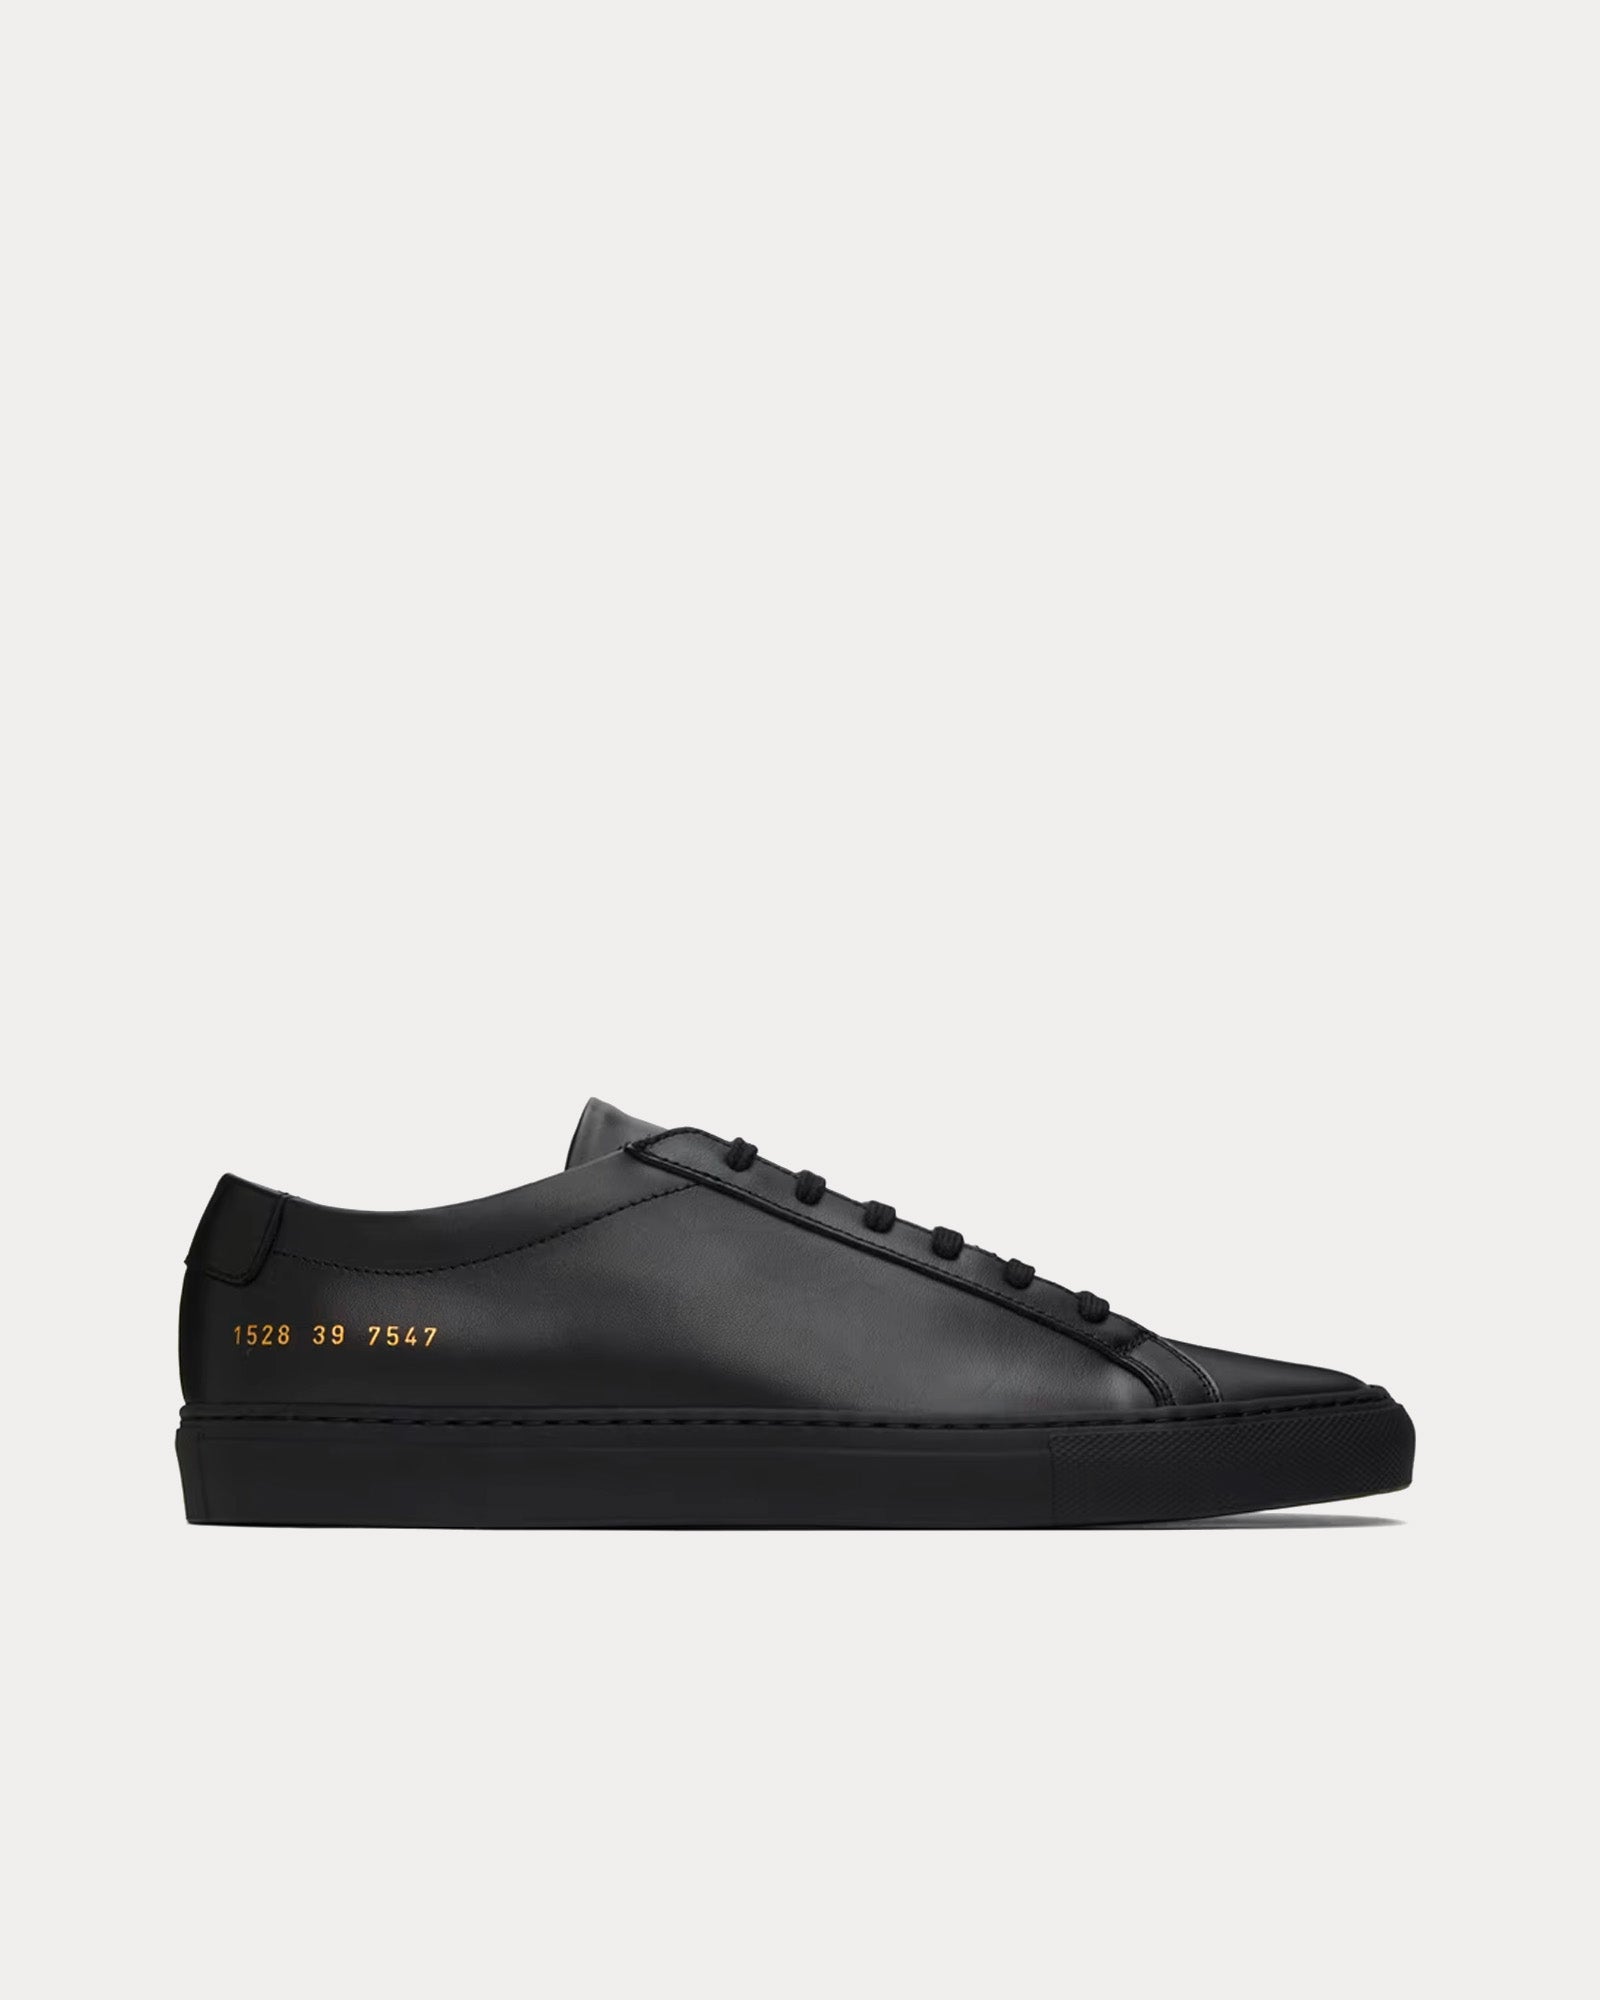 Common Projects - Original Achilles Leather Black Low Top Sneakers